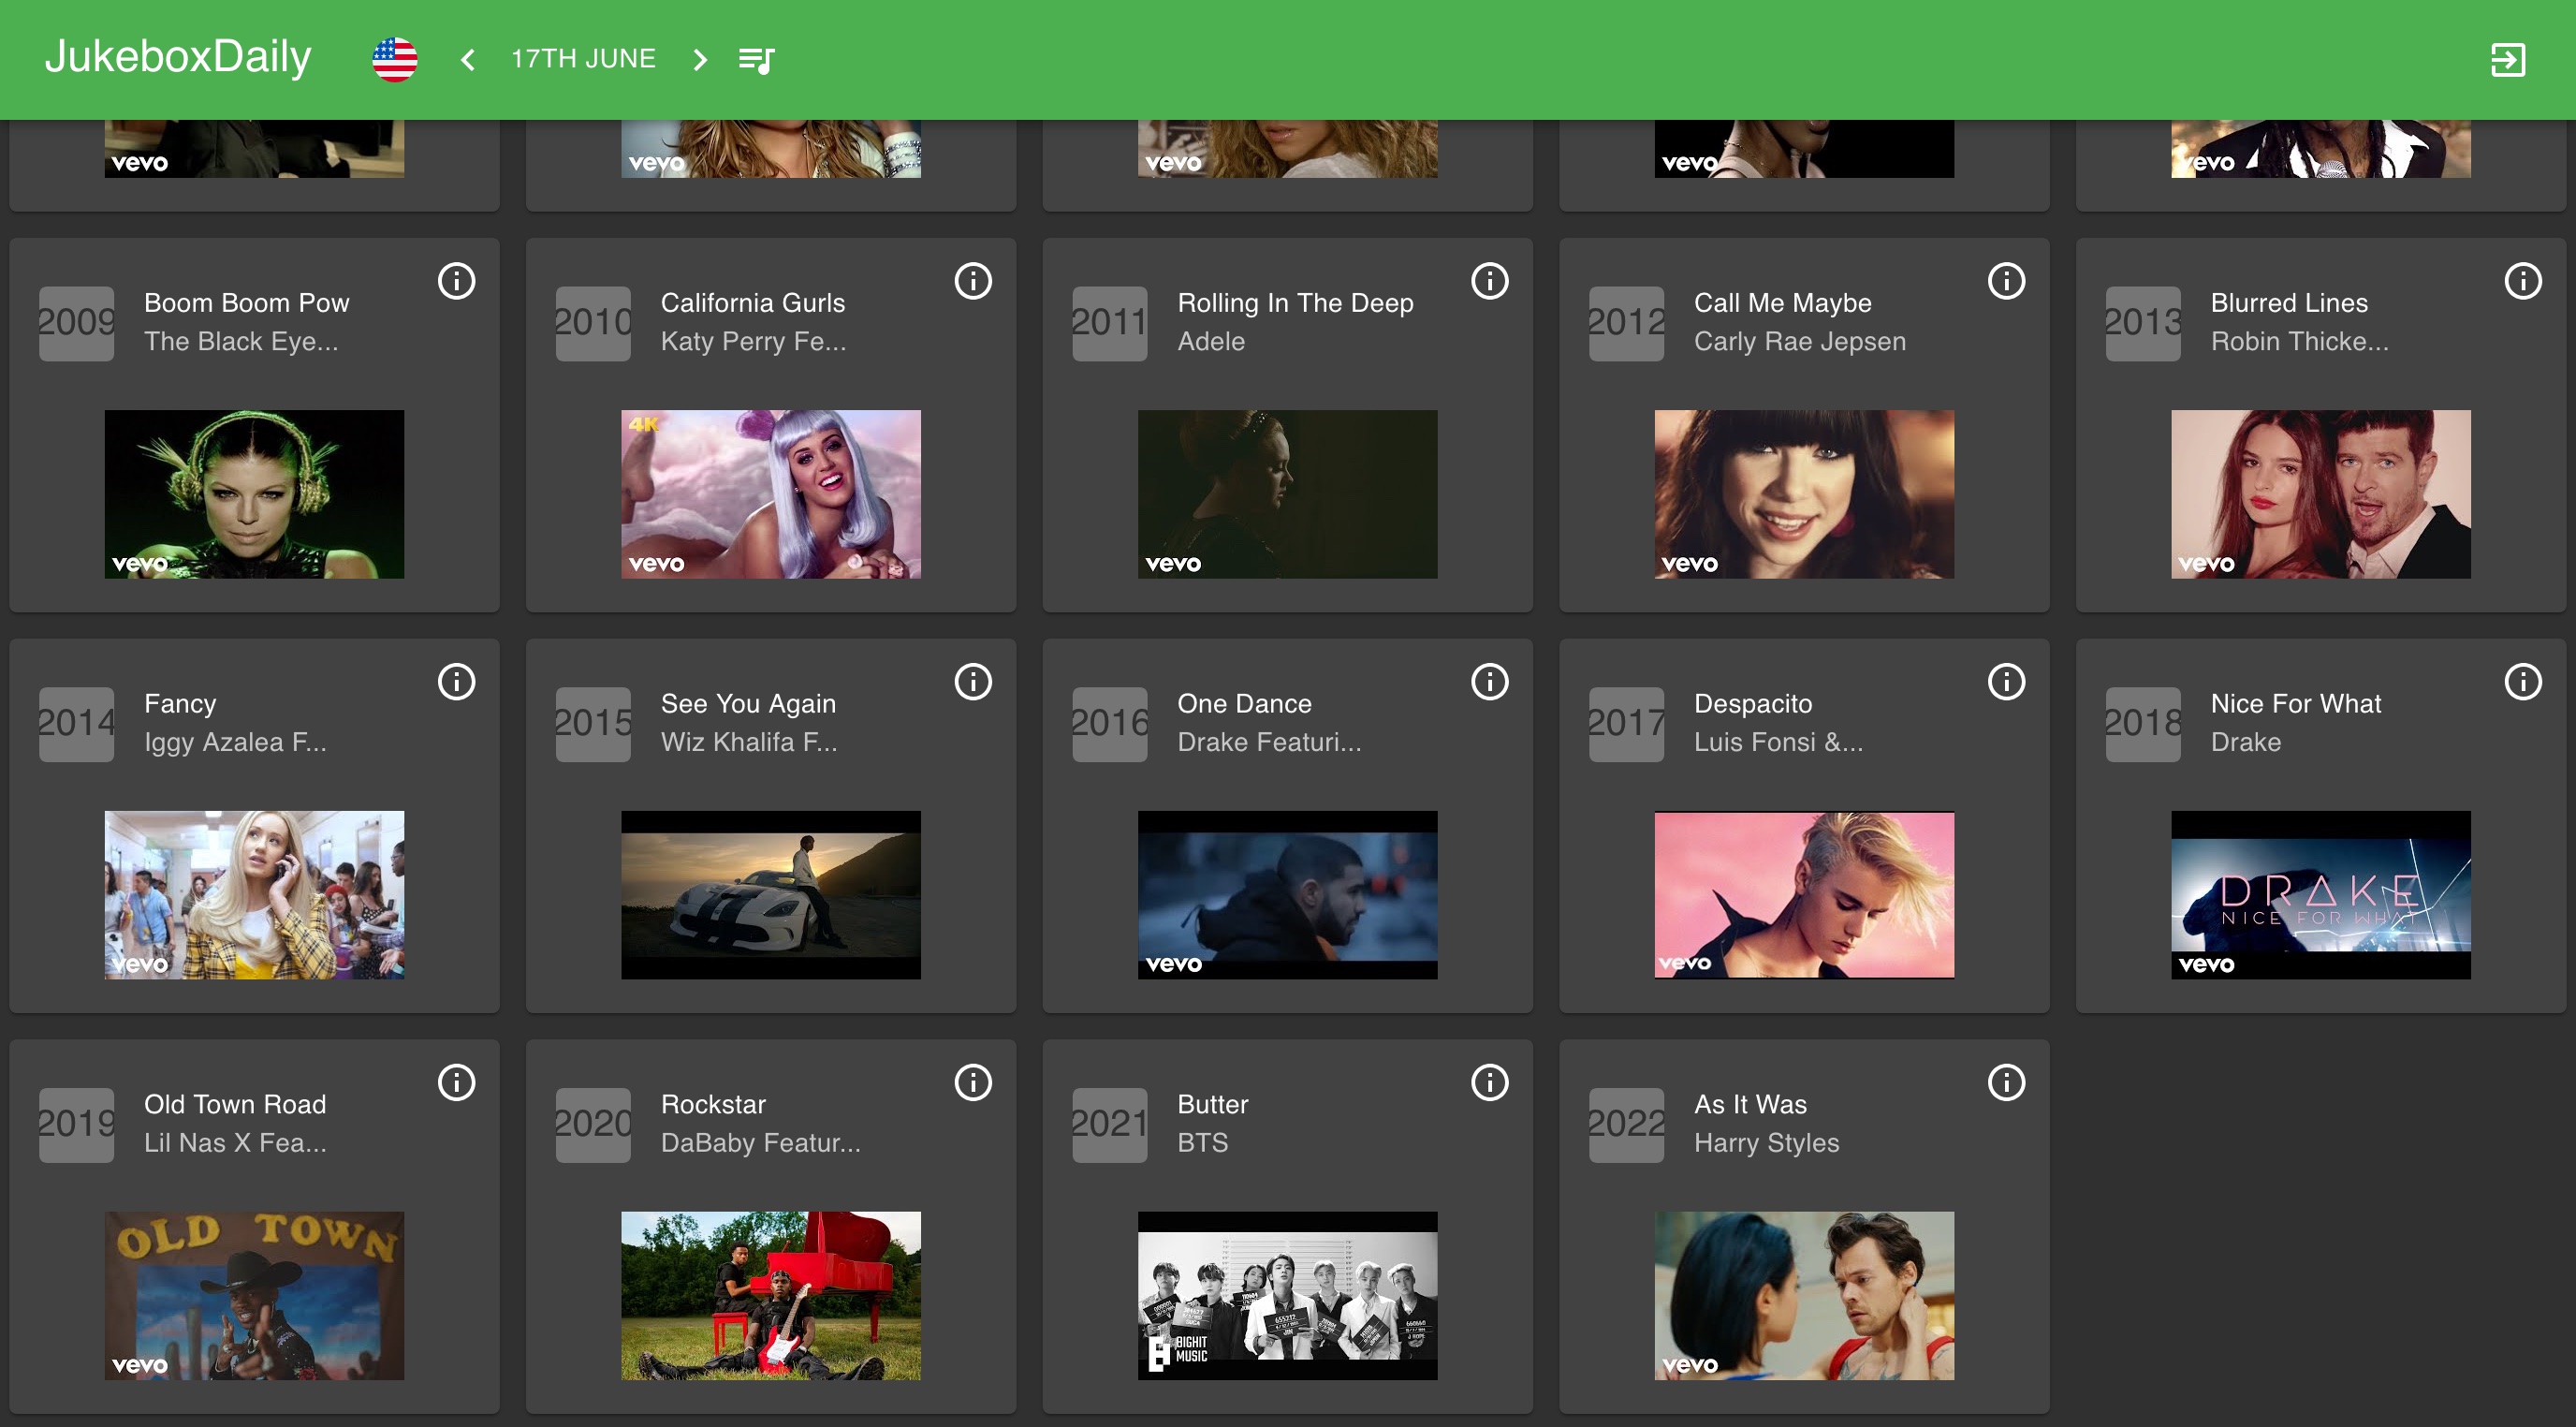 Screenshot of the JukeboxDaily site showing the grid view of each #1 song by year.